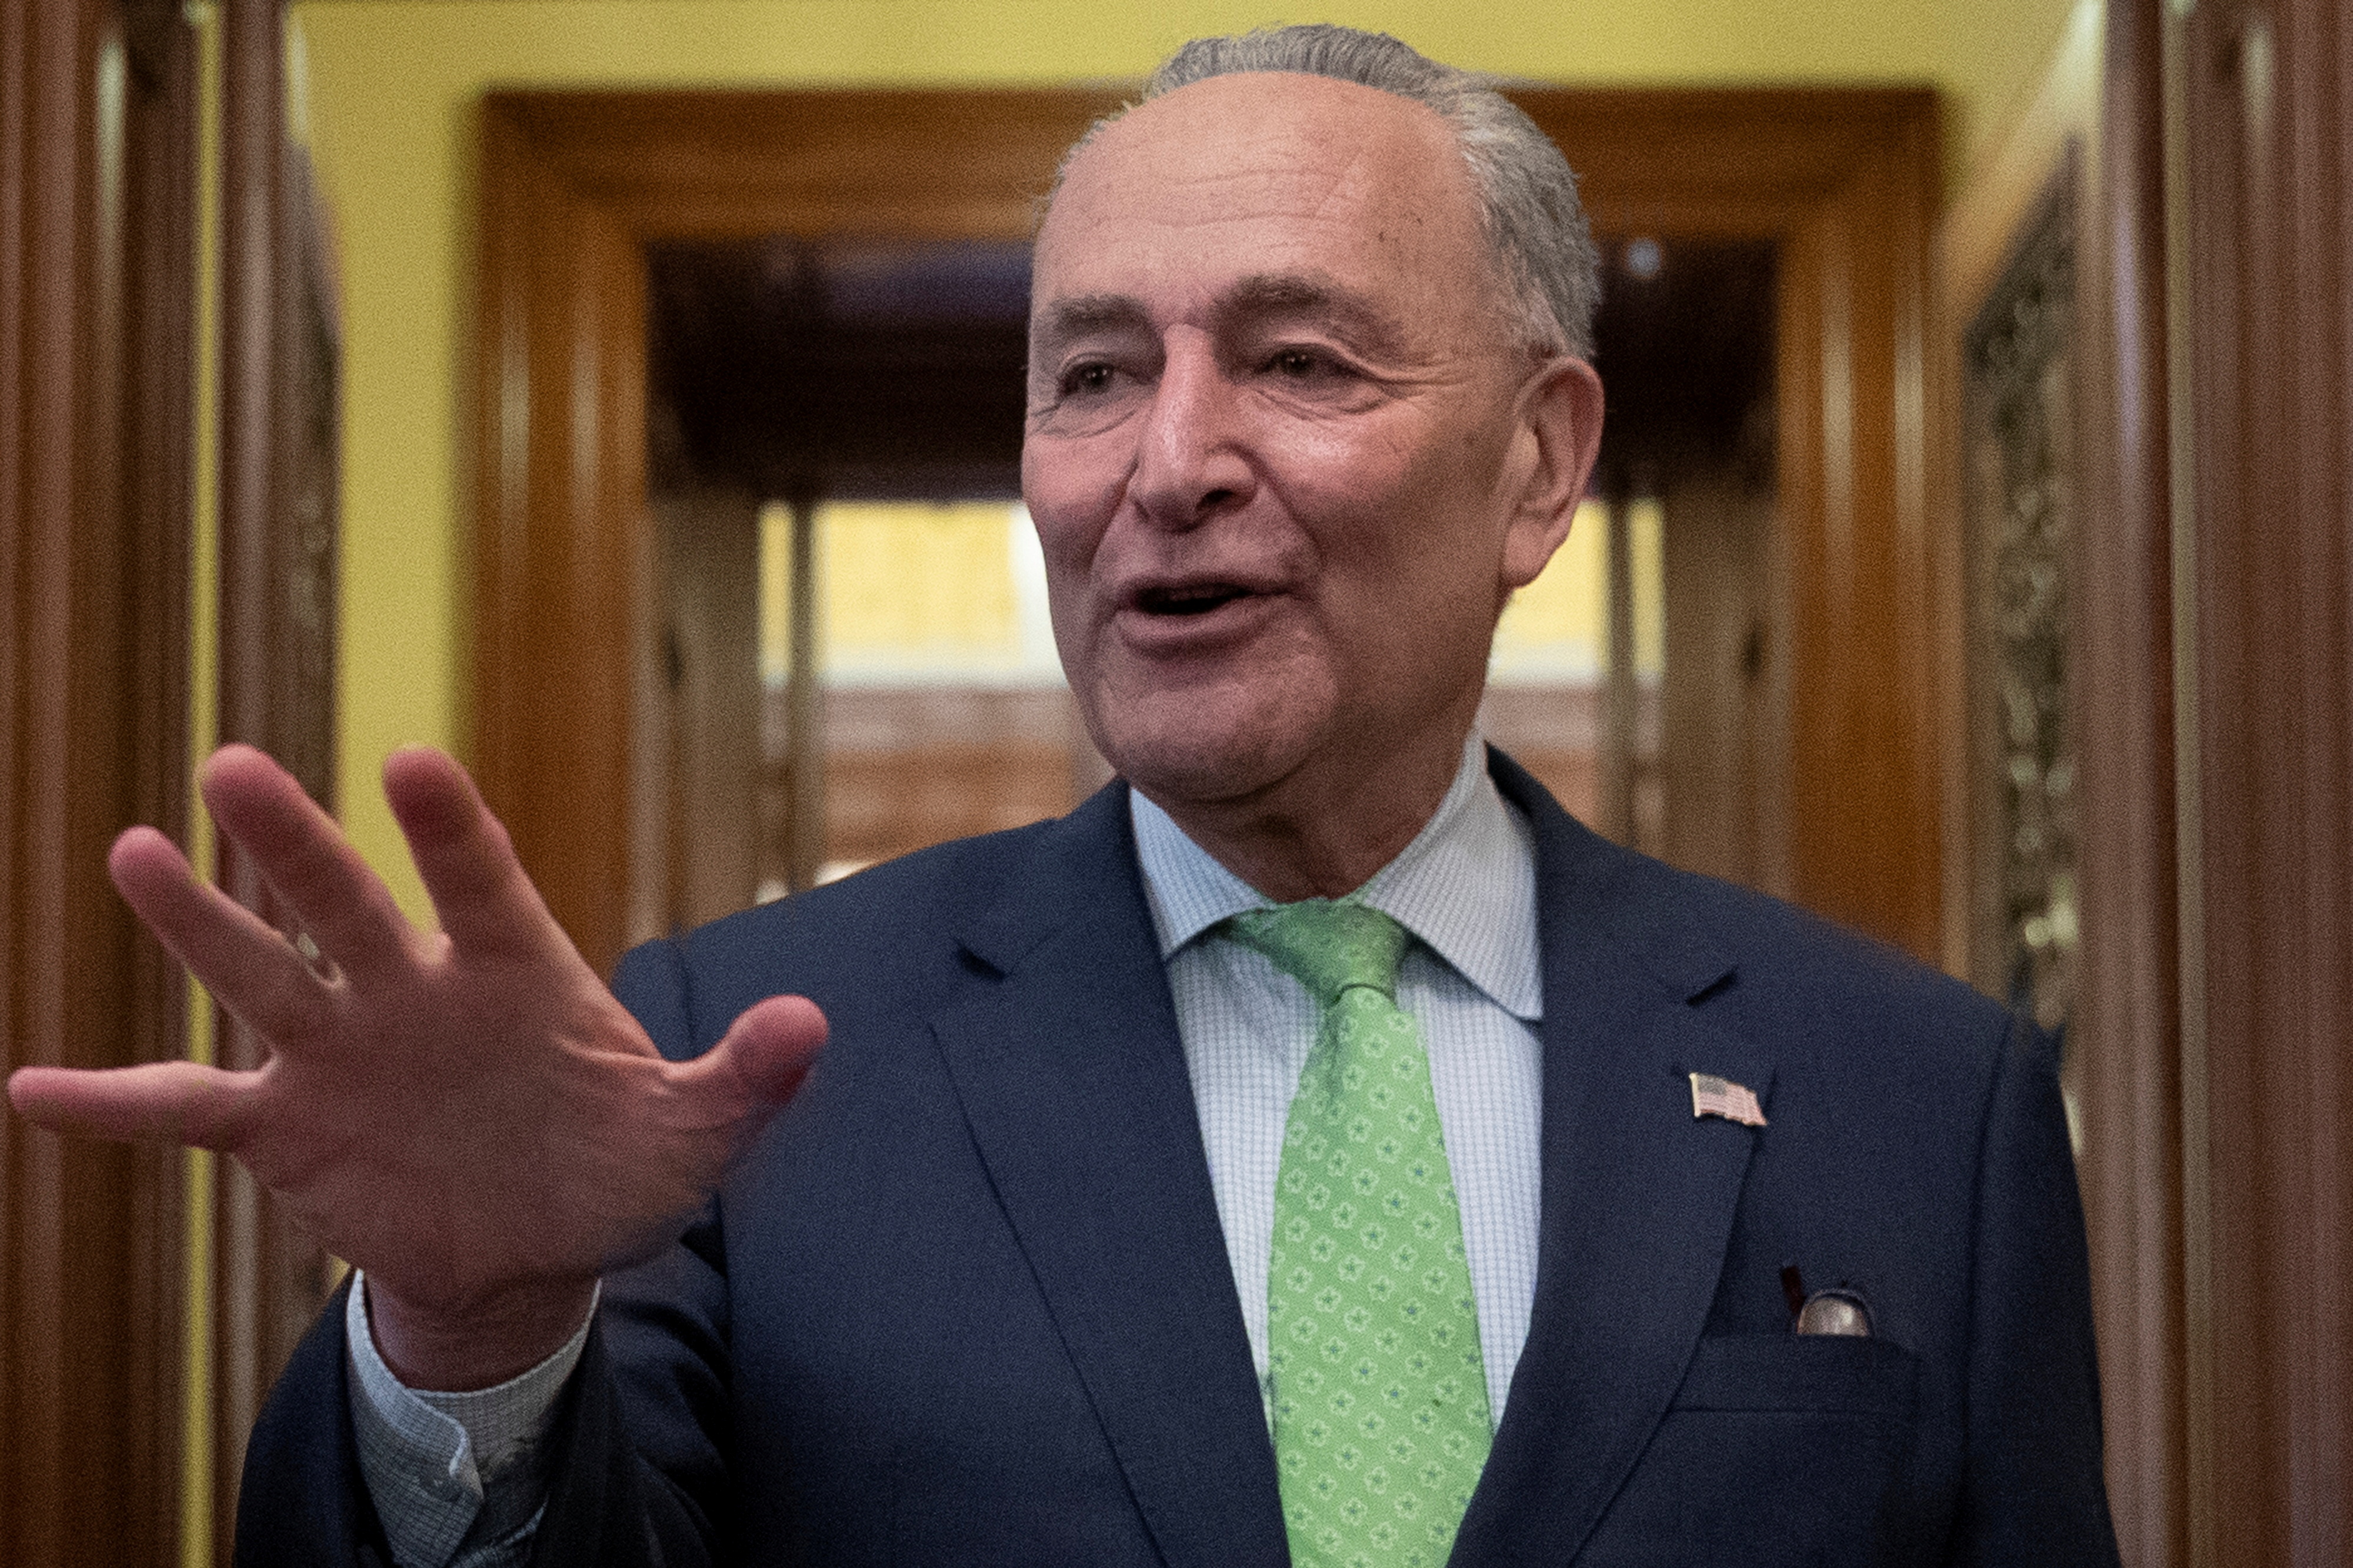 Senate Majority Leader Schumer speaks to news reporters following a deal on infrastructure on Capitol Hill in Washington